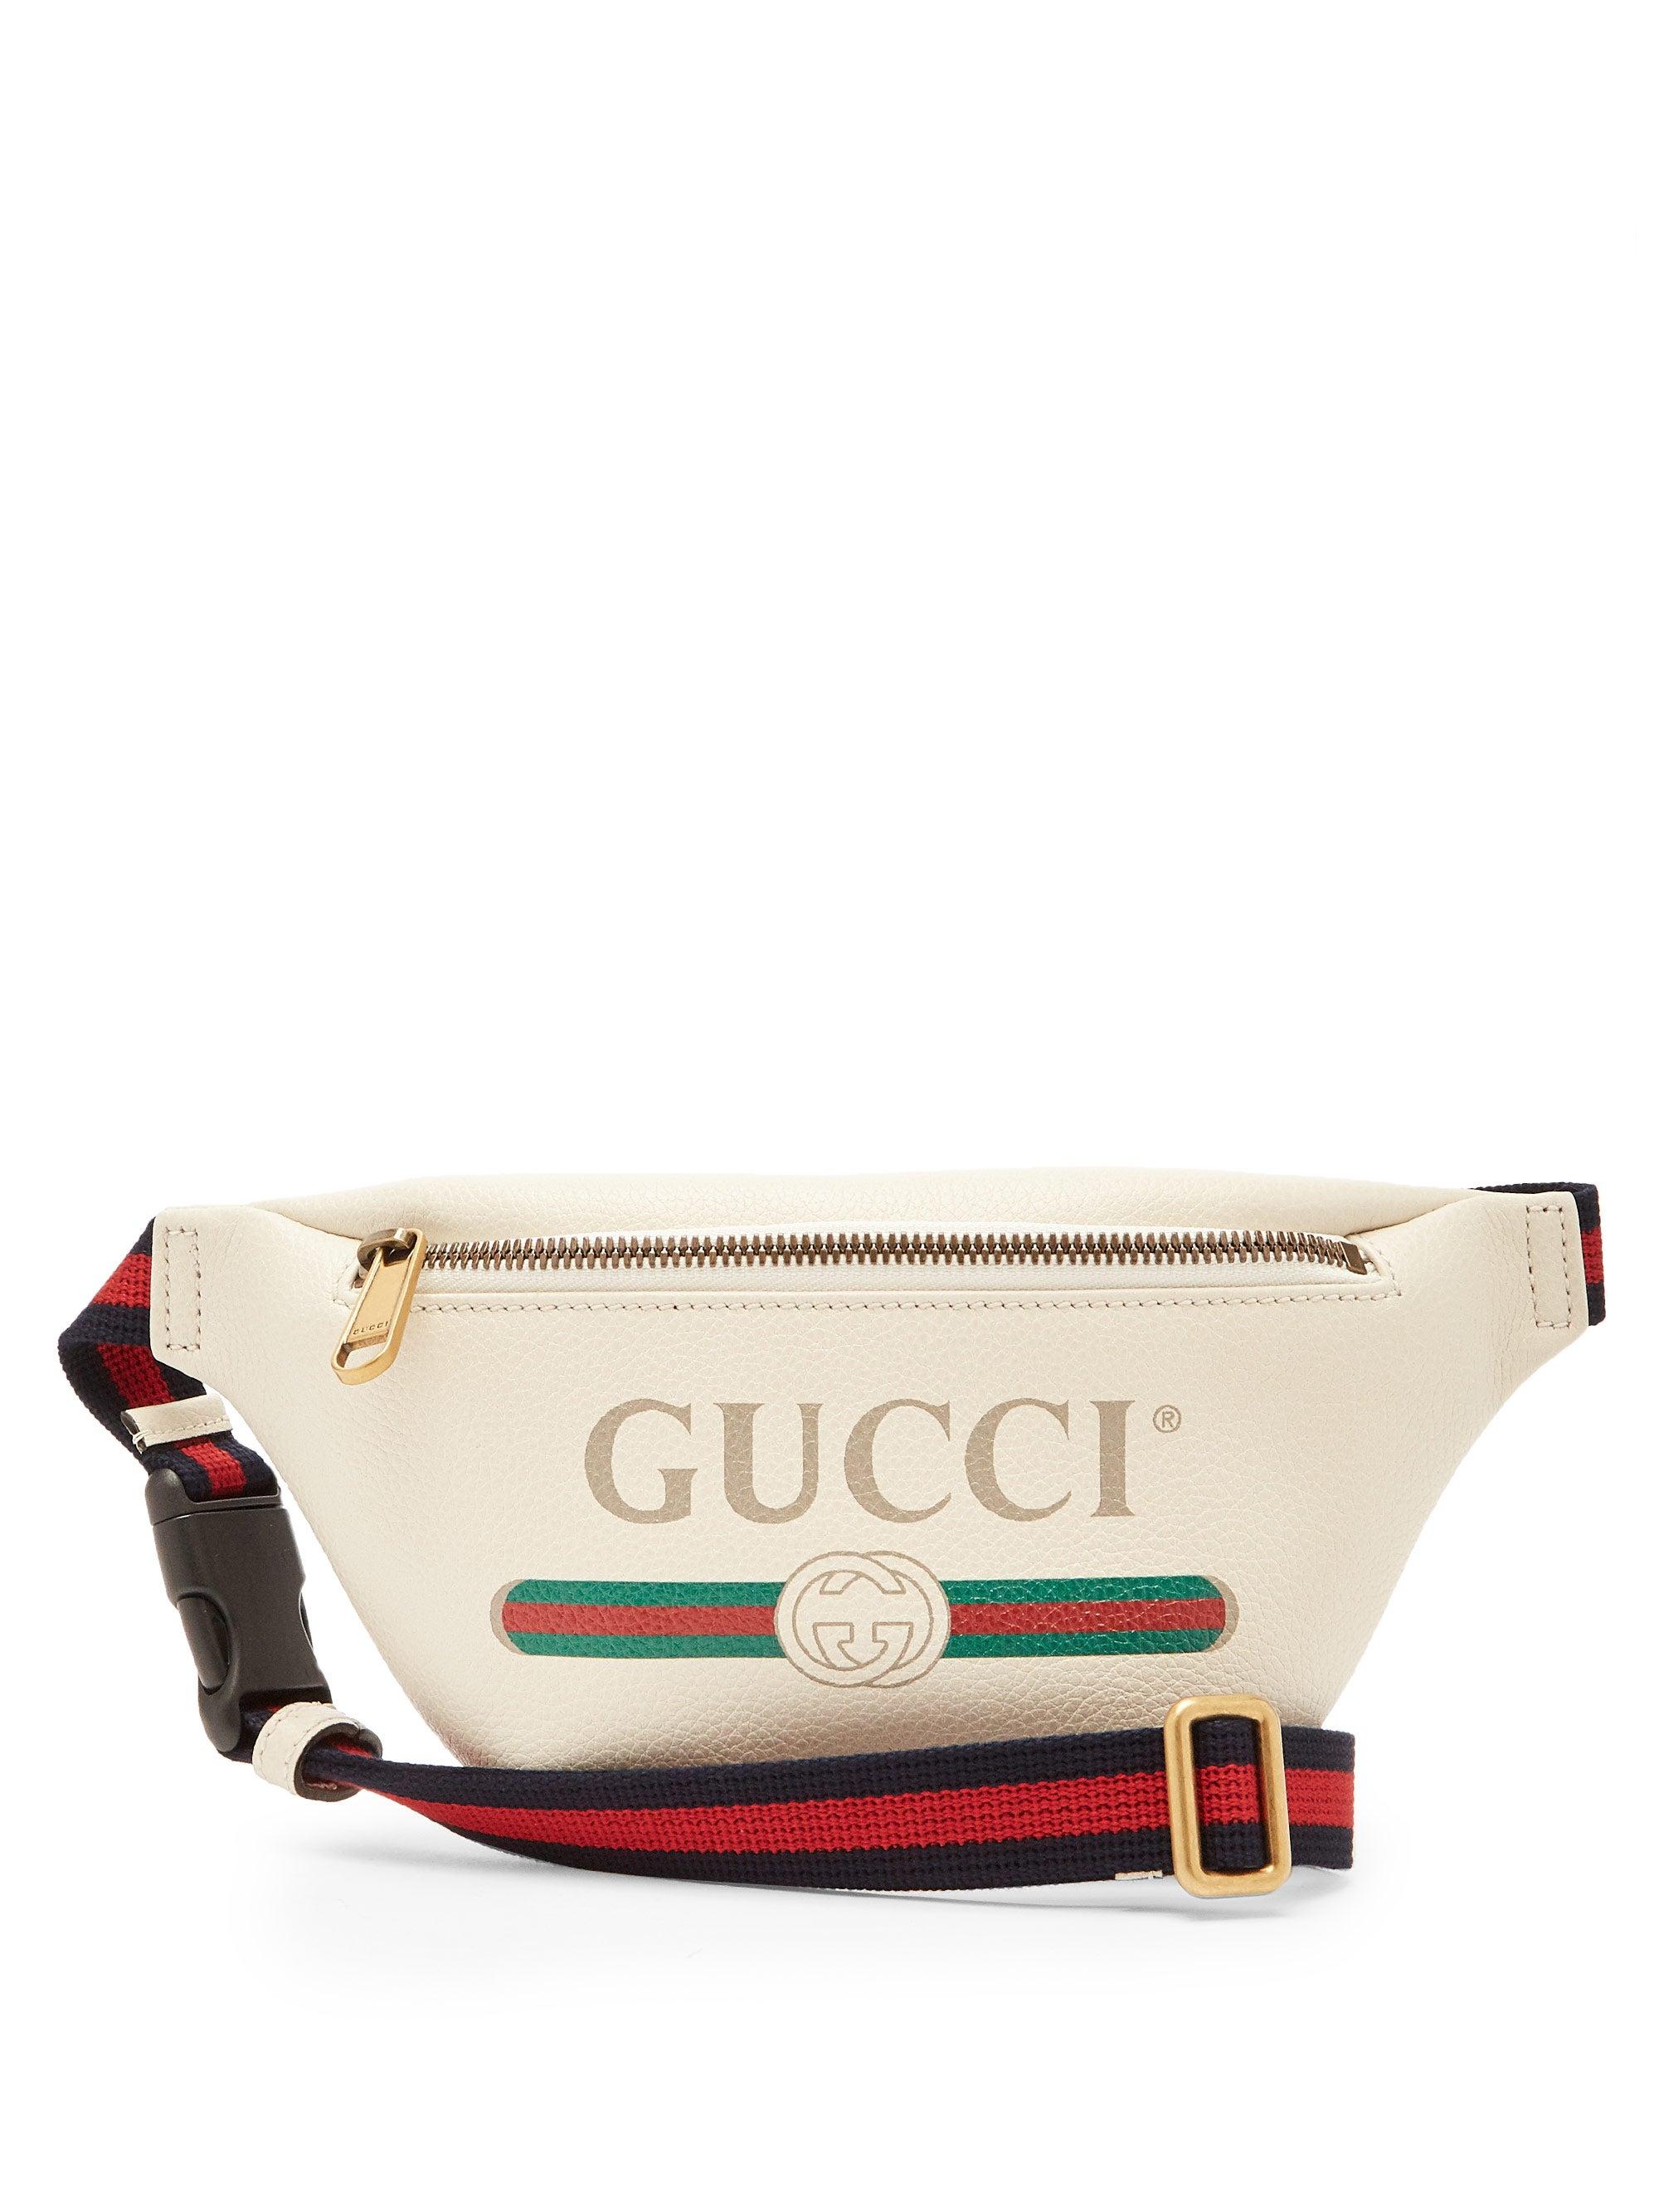 Gucci Print Leather Belt Bag in White & Green & Red (White) for Men | Lyst